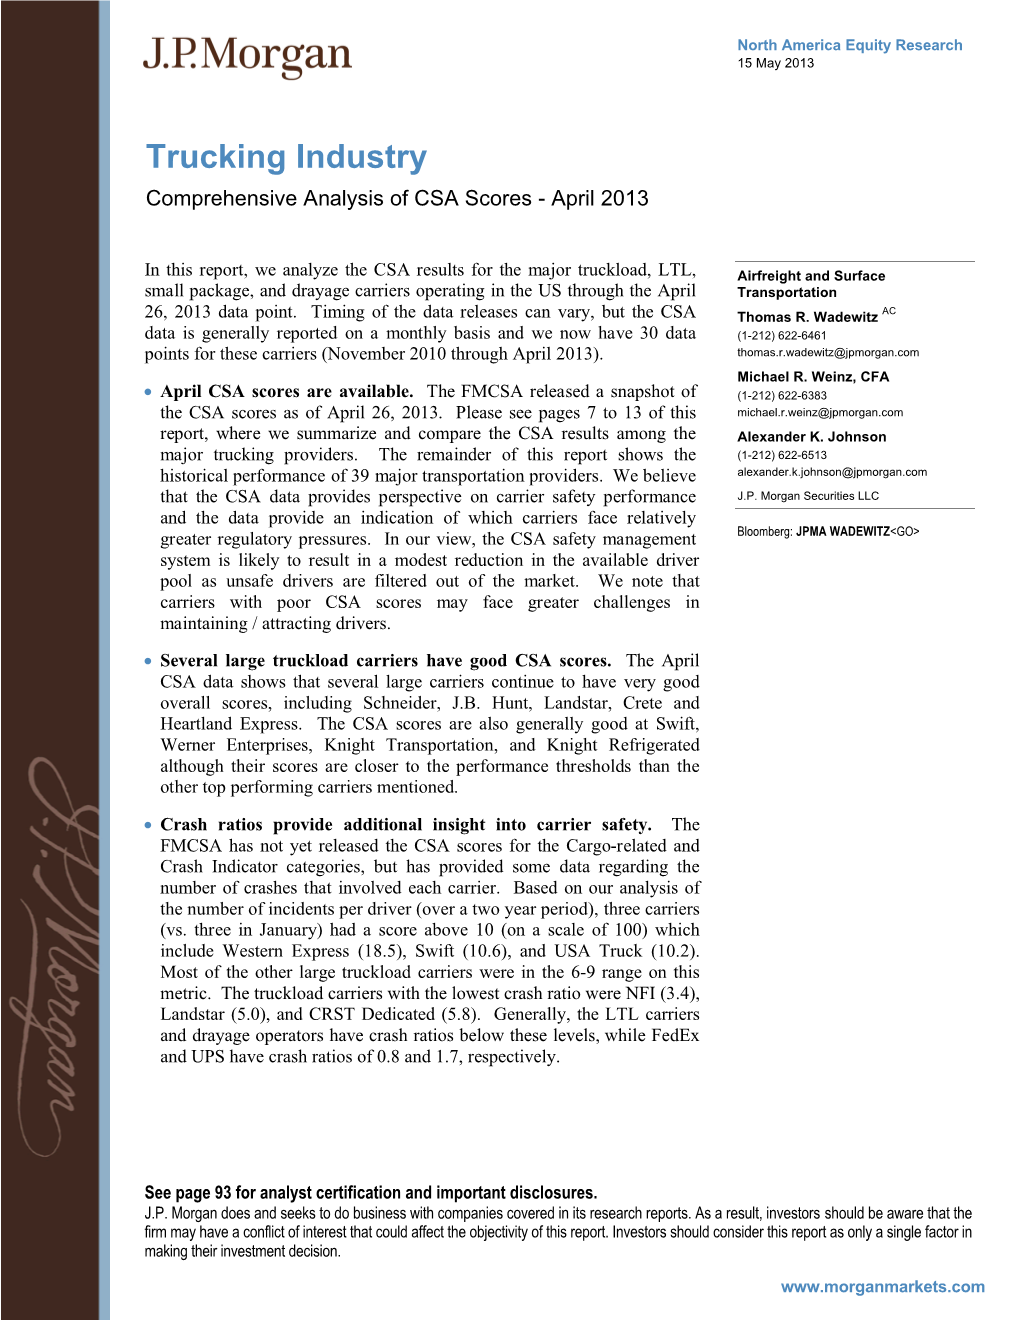 Trucking Industry Comprehensive Analysis of CSA Scores - April 2013